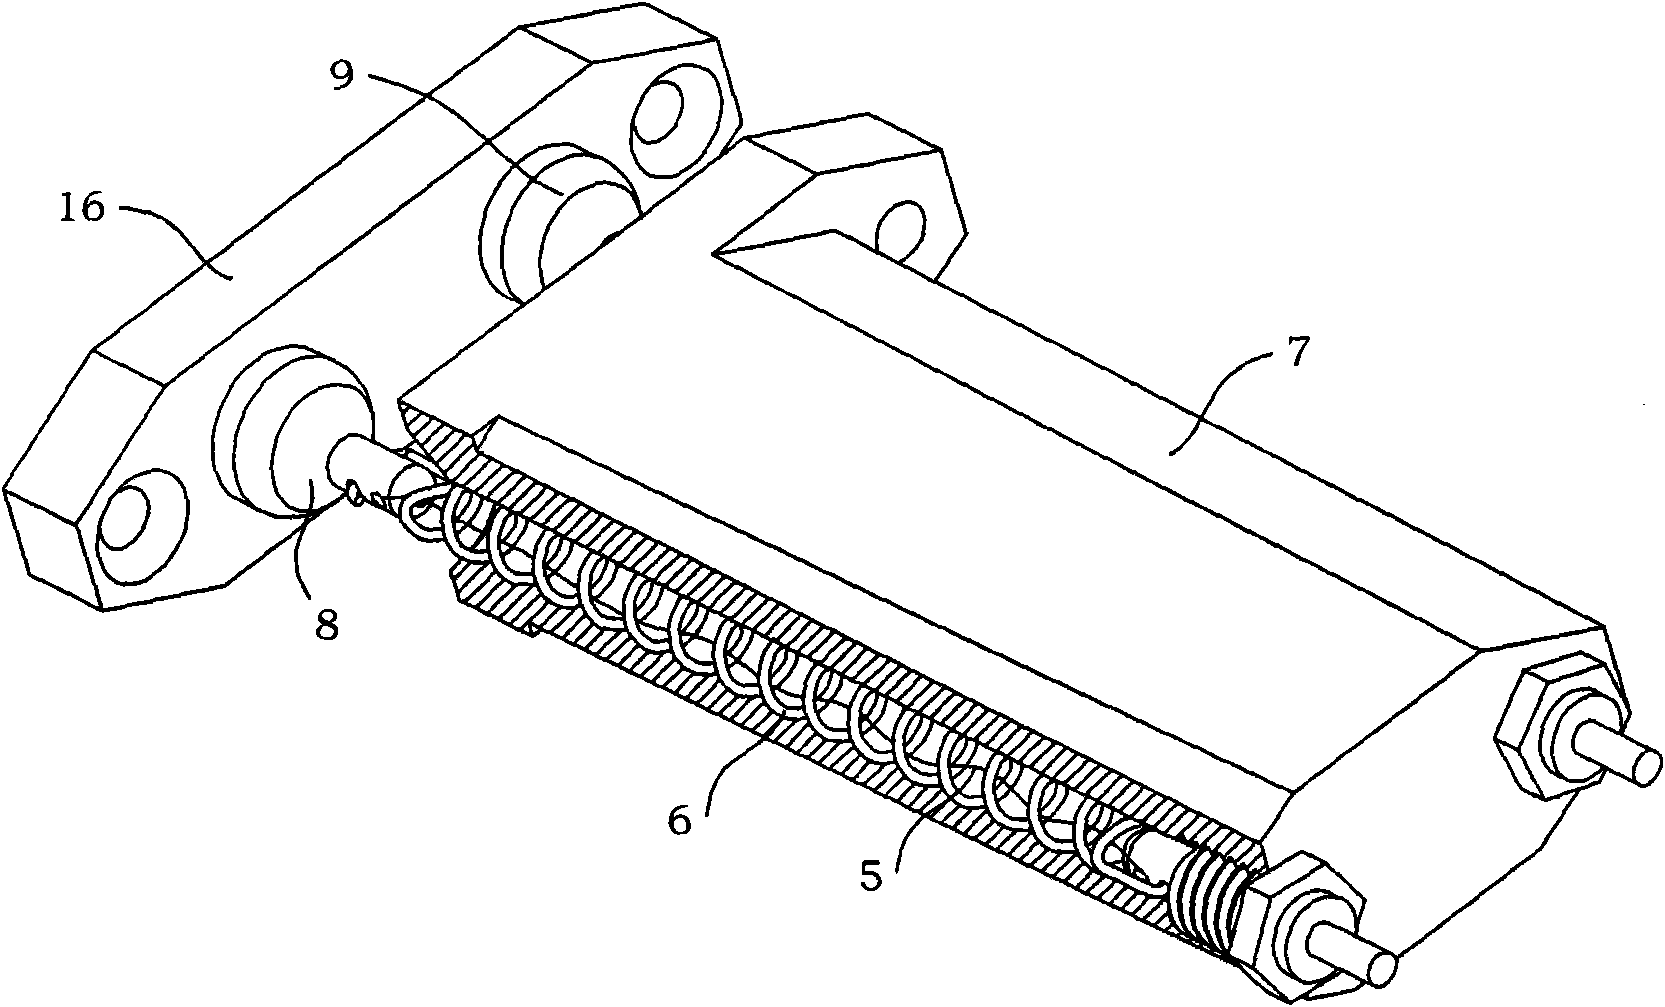 DC electrical docking device capable of automatically actuating and disconnecting